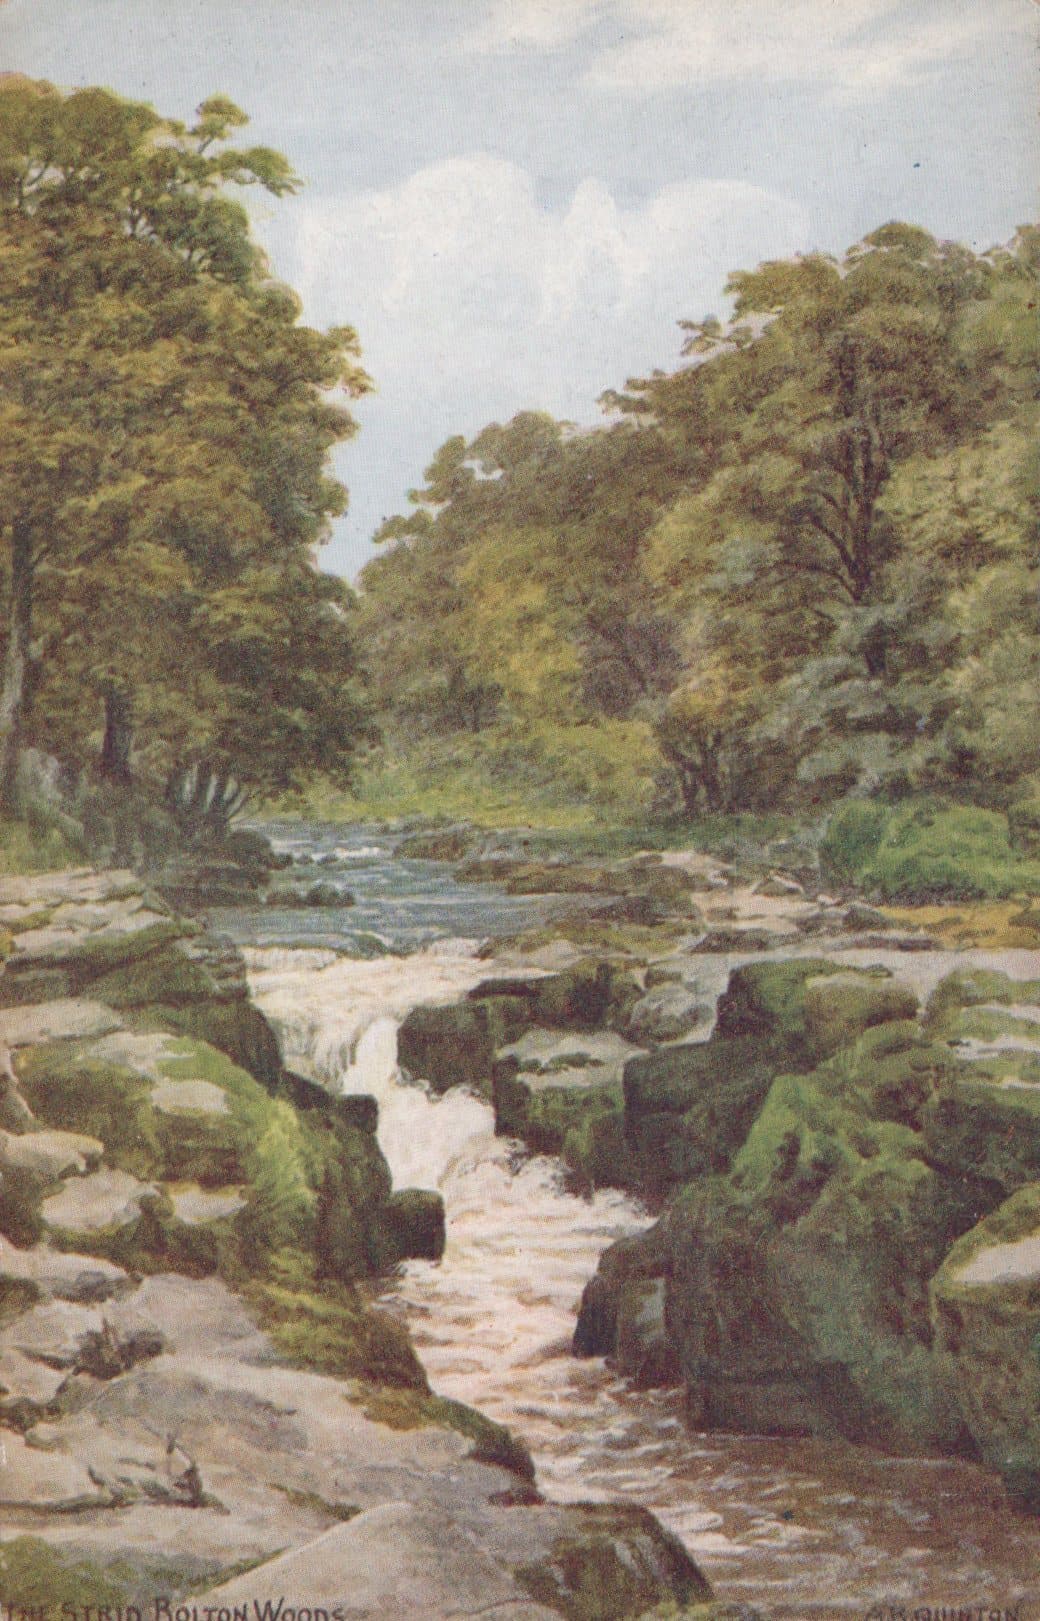 Yorkshire Postcard - The Strid, Bolton Woods - Artist A.R.Quinton - Mo’s Postcards 